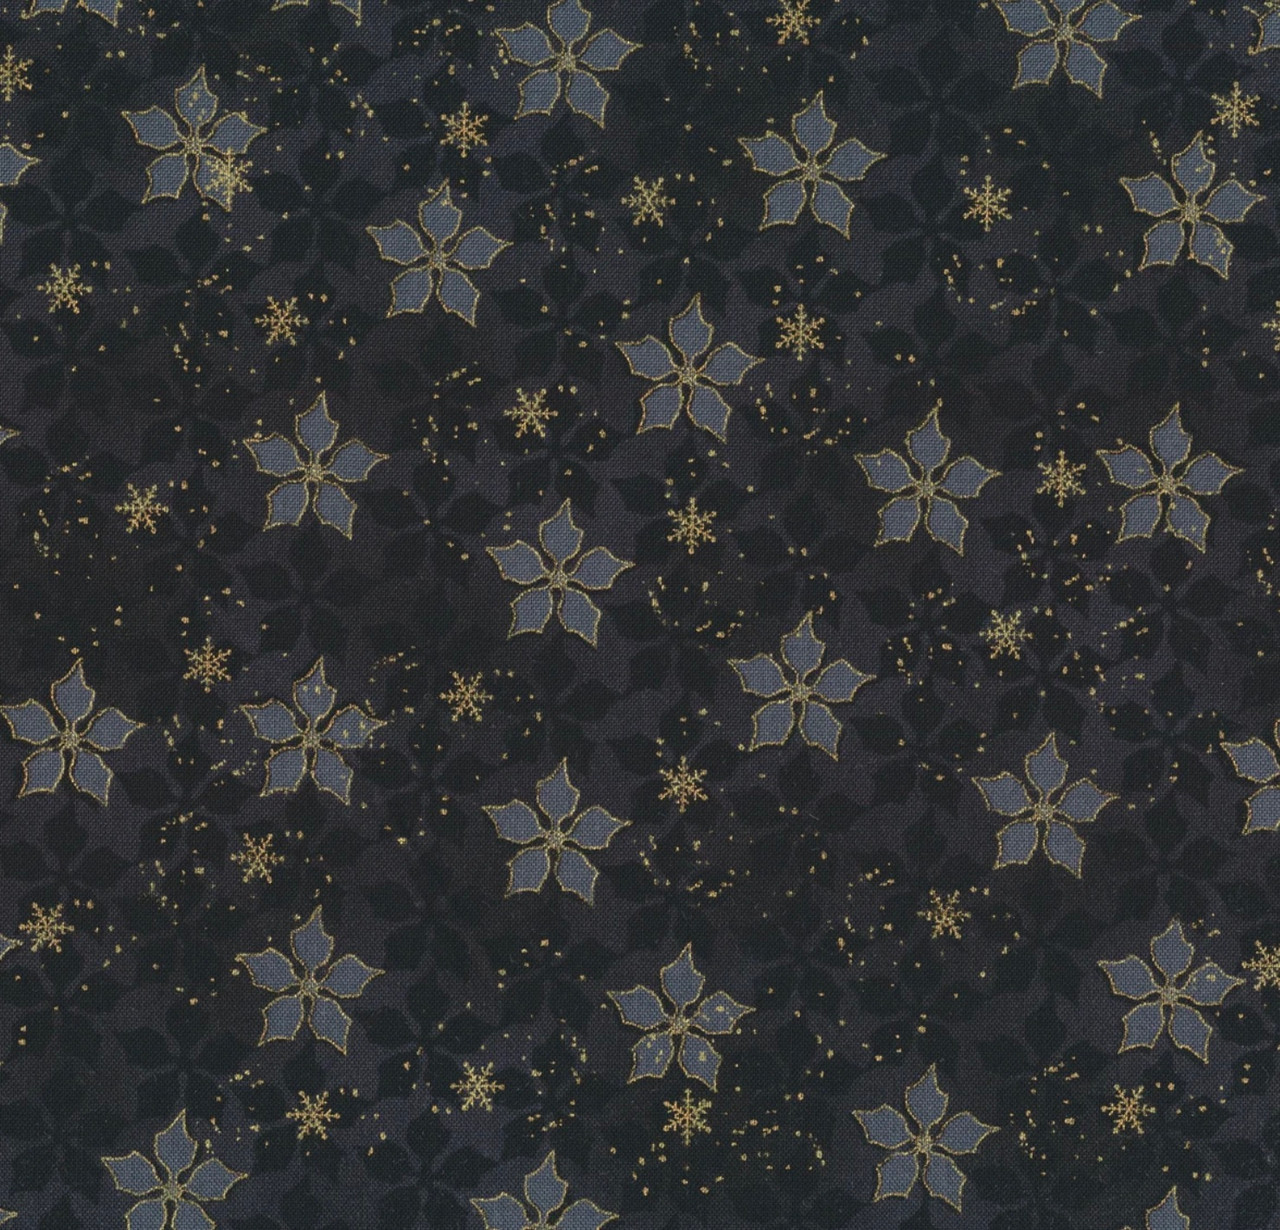 Stof Star Sprinkle Poinsettuas Black Gold Cotton Fabric By The Yard